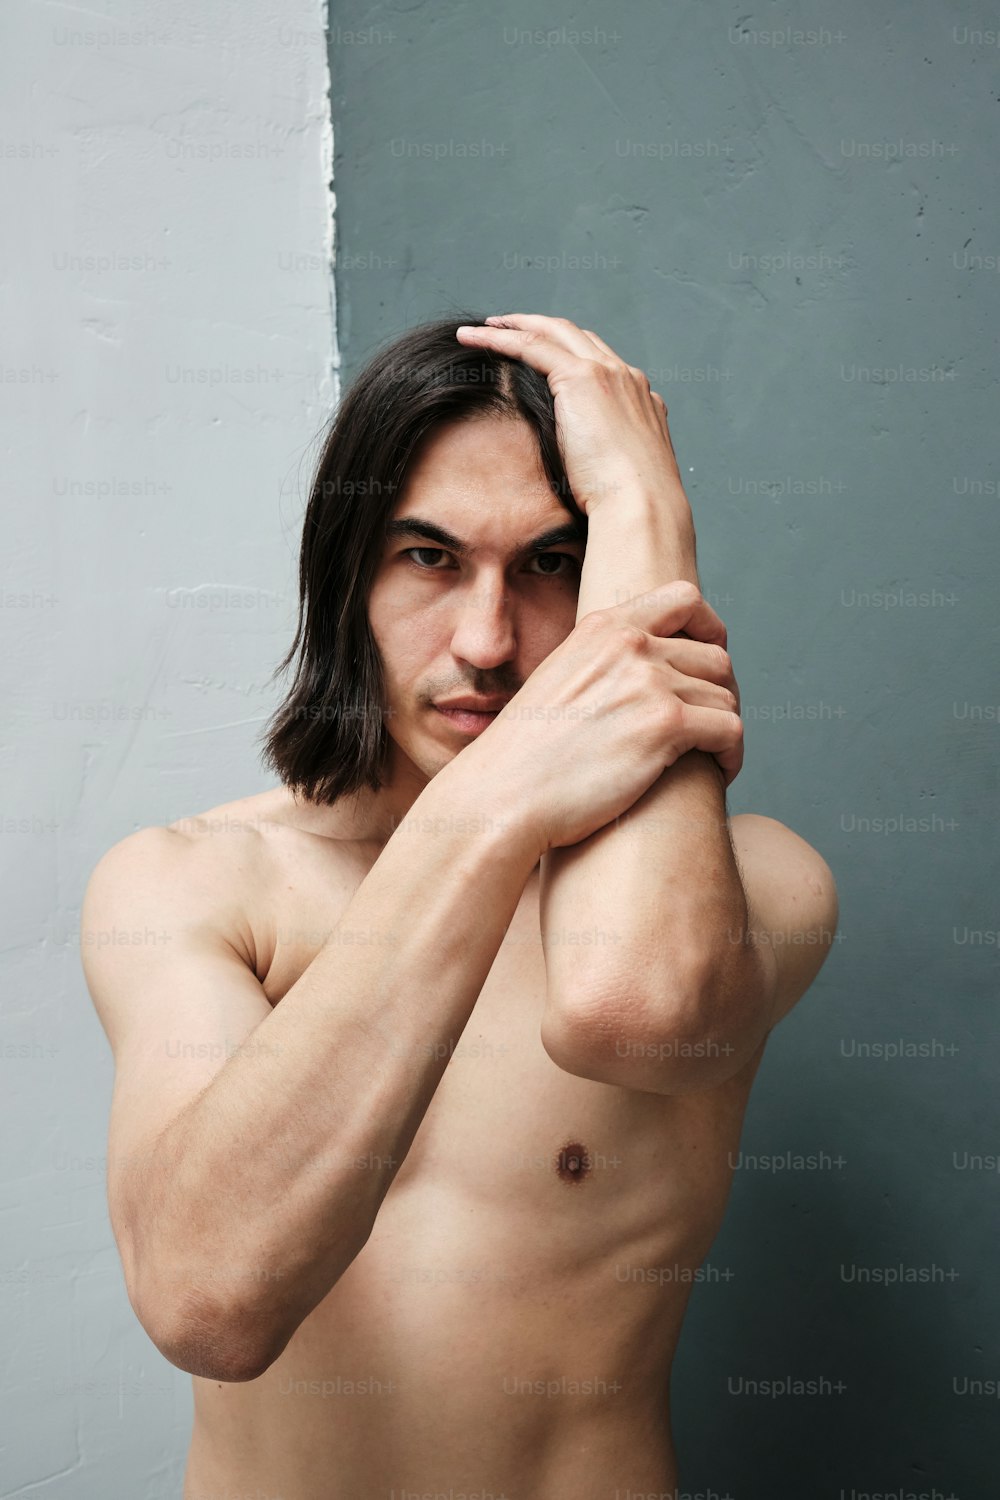 a man with long hair and no shirt posing for a picture